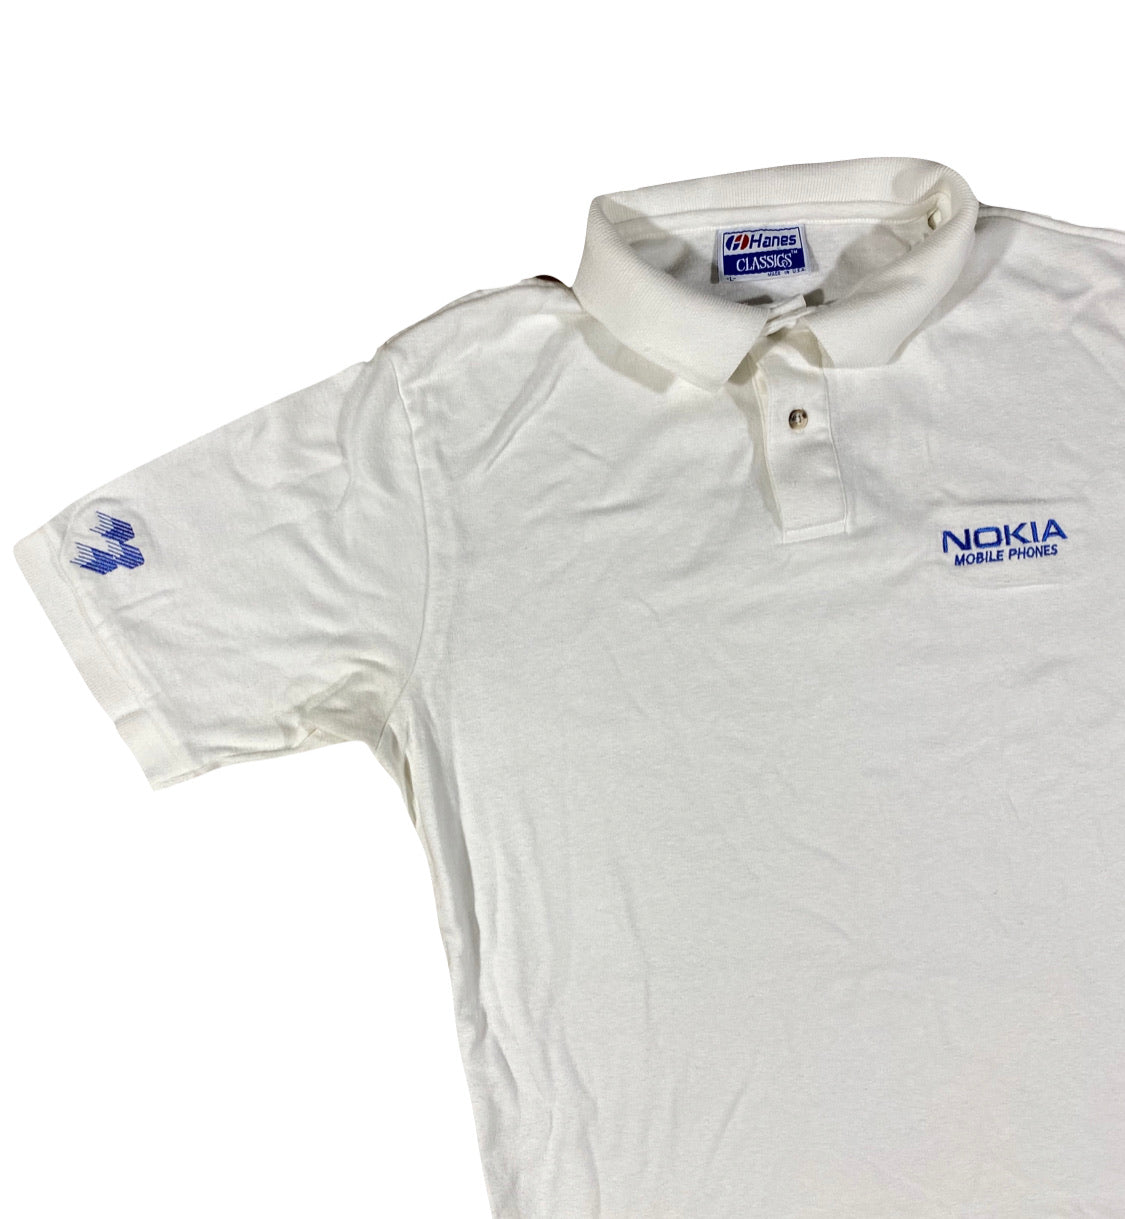 90s Nokia mobile phones polo. Large